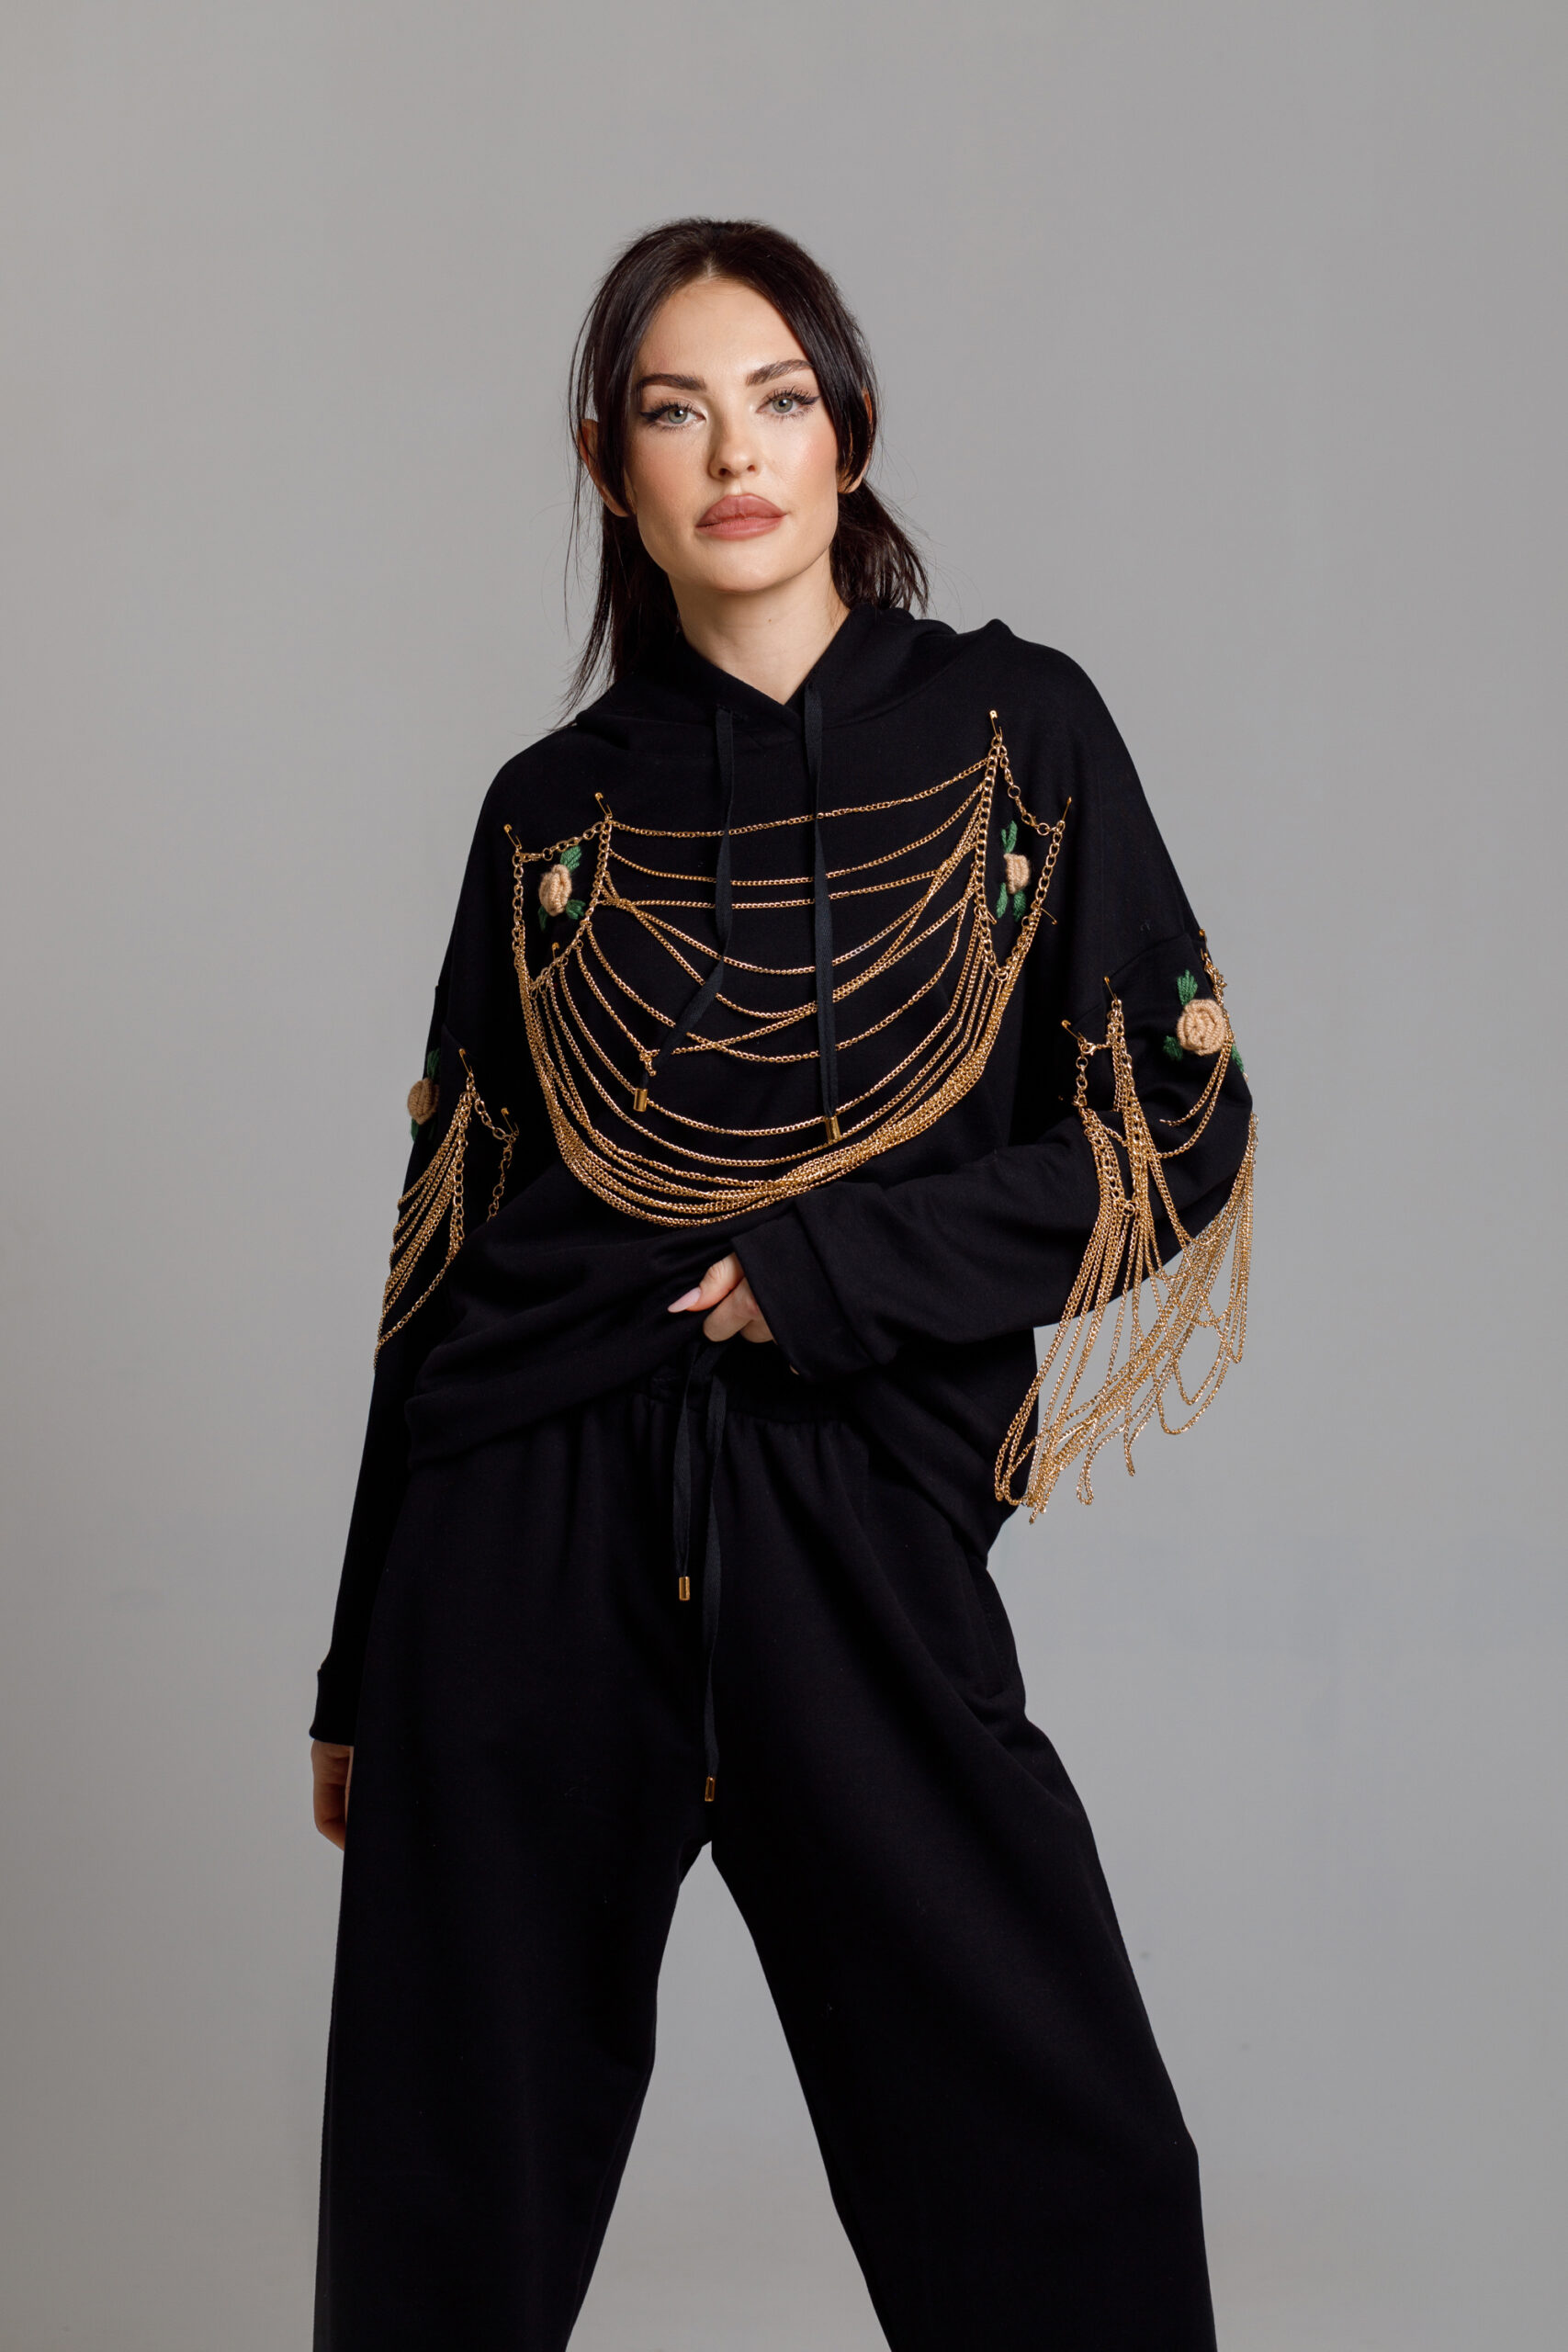 MARS black sweatshirt with chain and embroidery. Natural fabrics, original design, handmade embroidery